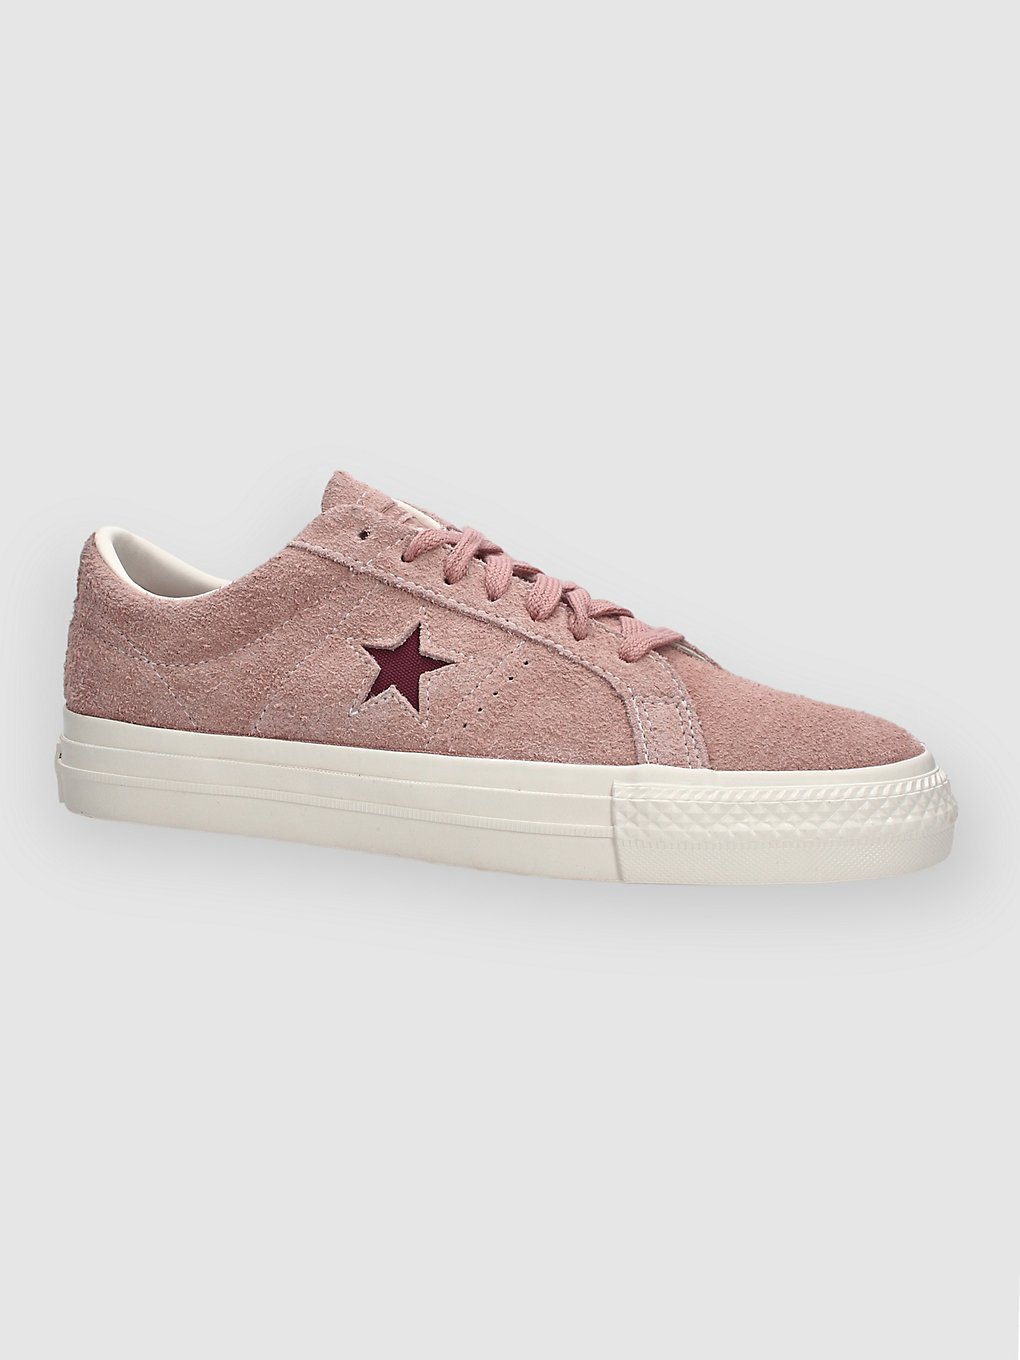 converse one star pro vintage suede skate shoes cherry vision